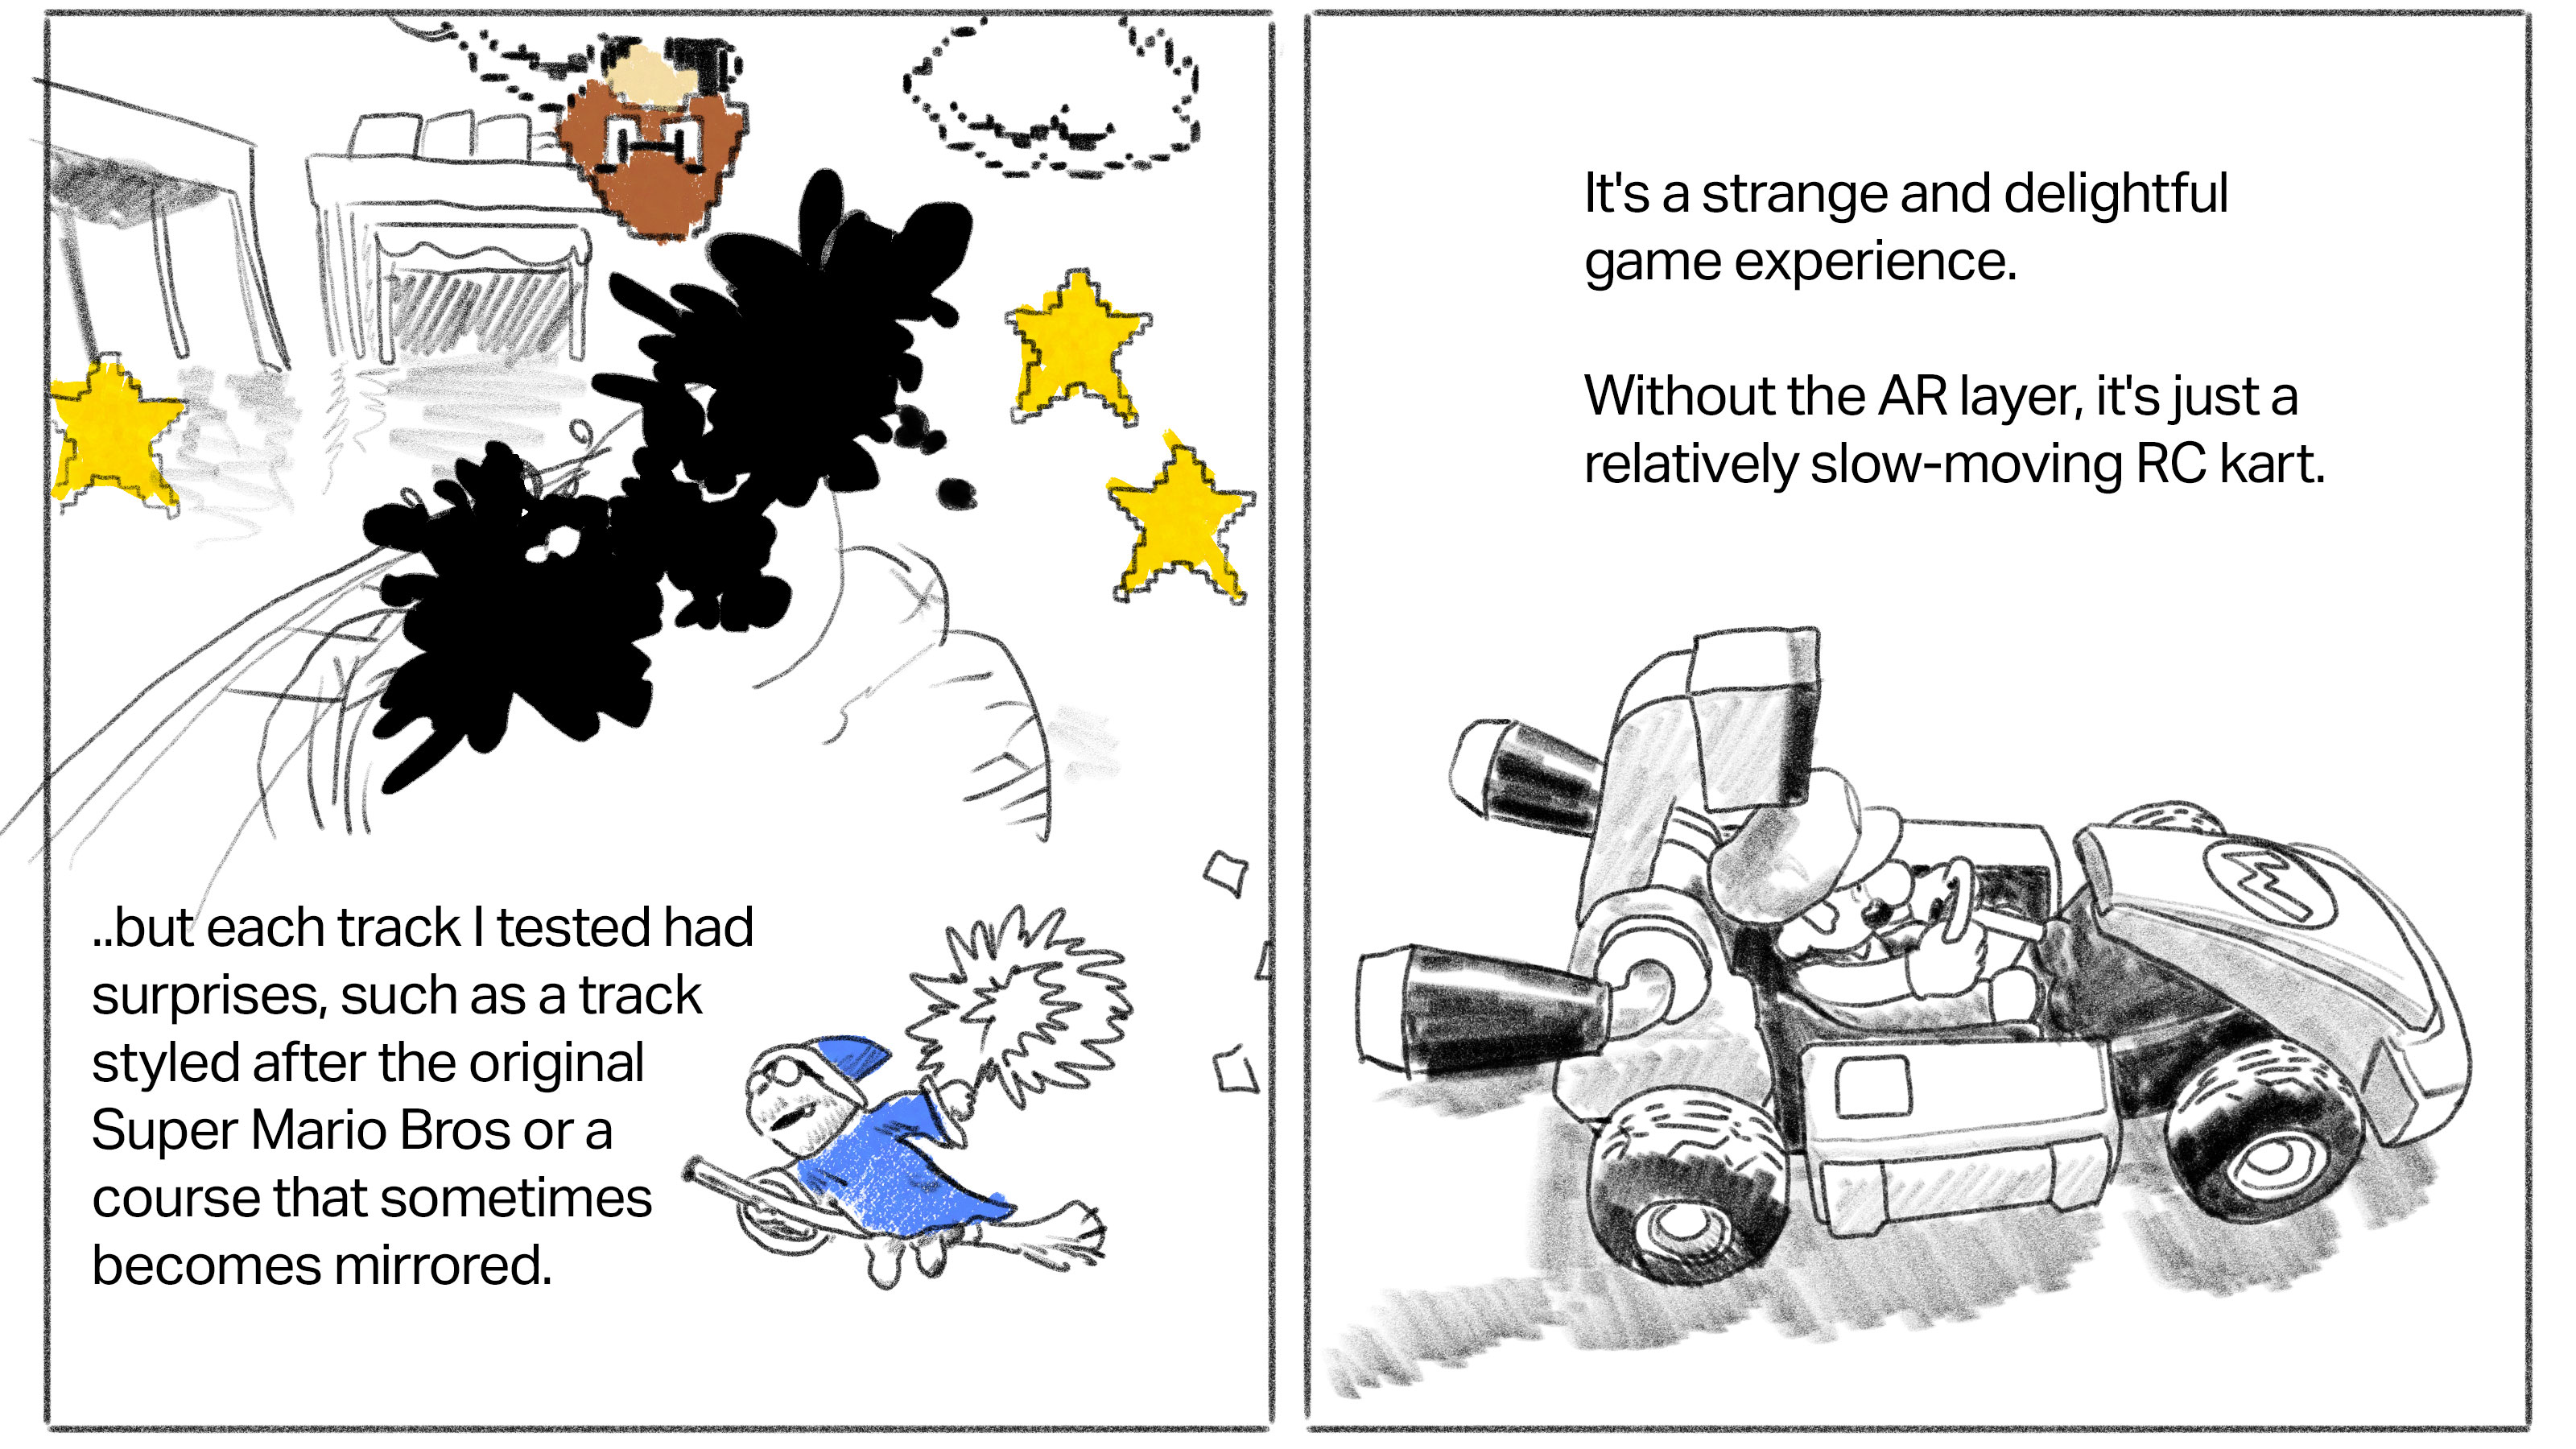 Text: ...but each track I tested had surprises, such as a track styled after the original Super Mario Bros or a course that sometimes becomes mirrored. [Image: In-game drawing of World 1-1 with goomba being struck by kart] Text: It's a strange and delightful game experience. Without the AR layer, it's just a relatively slow-moving RC kart. [Image: a drawing of the Mario Kart toy]